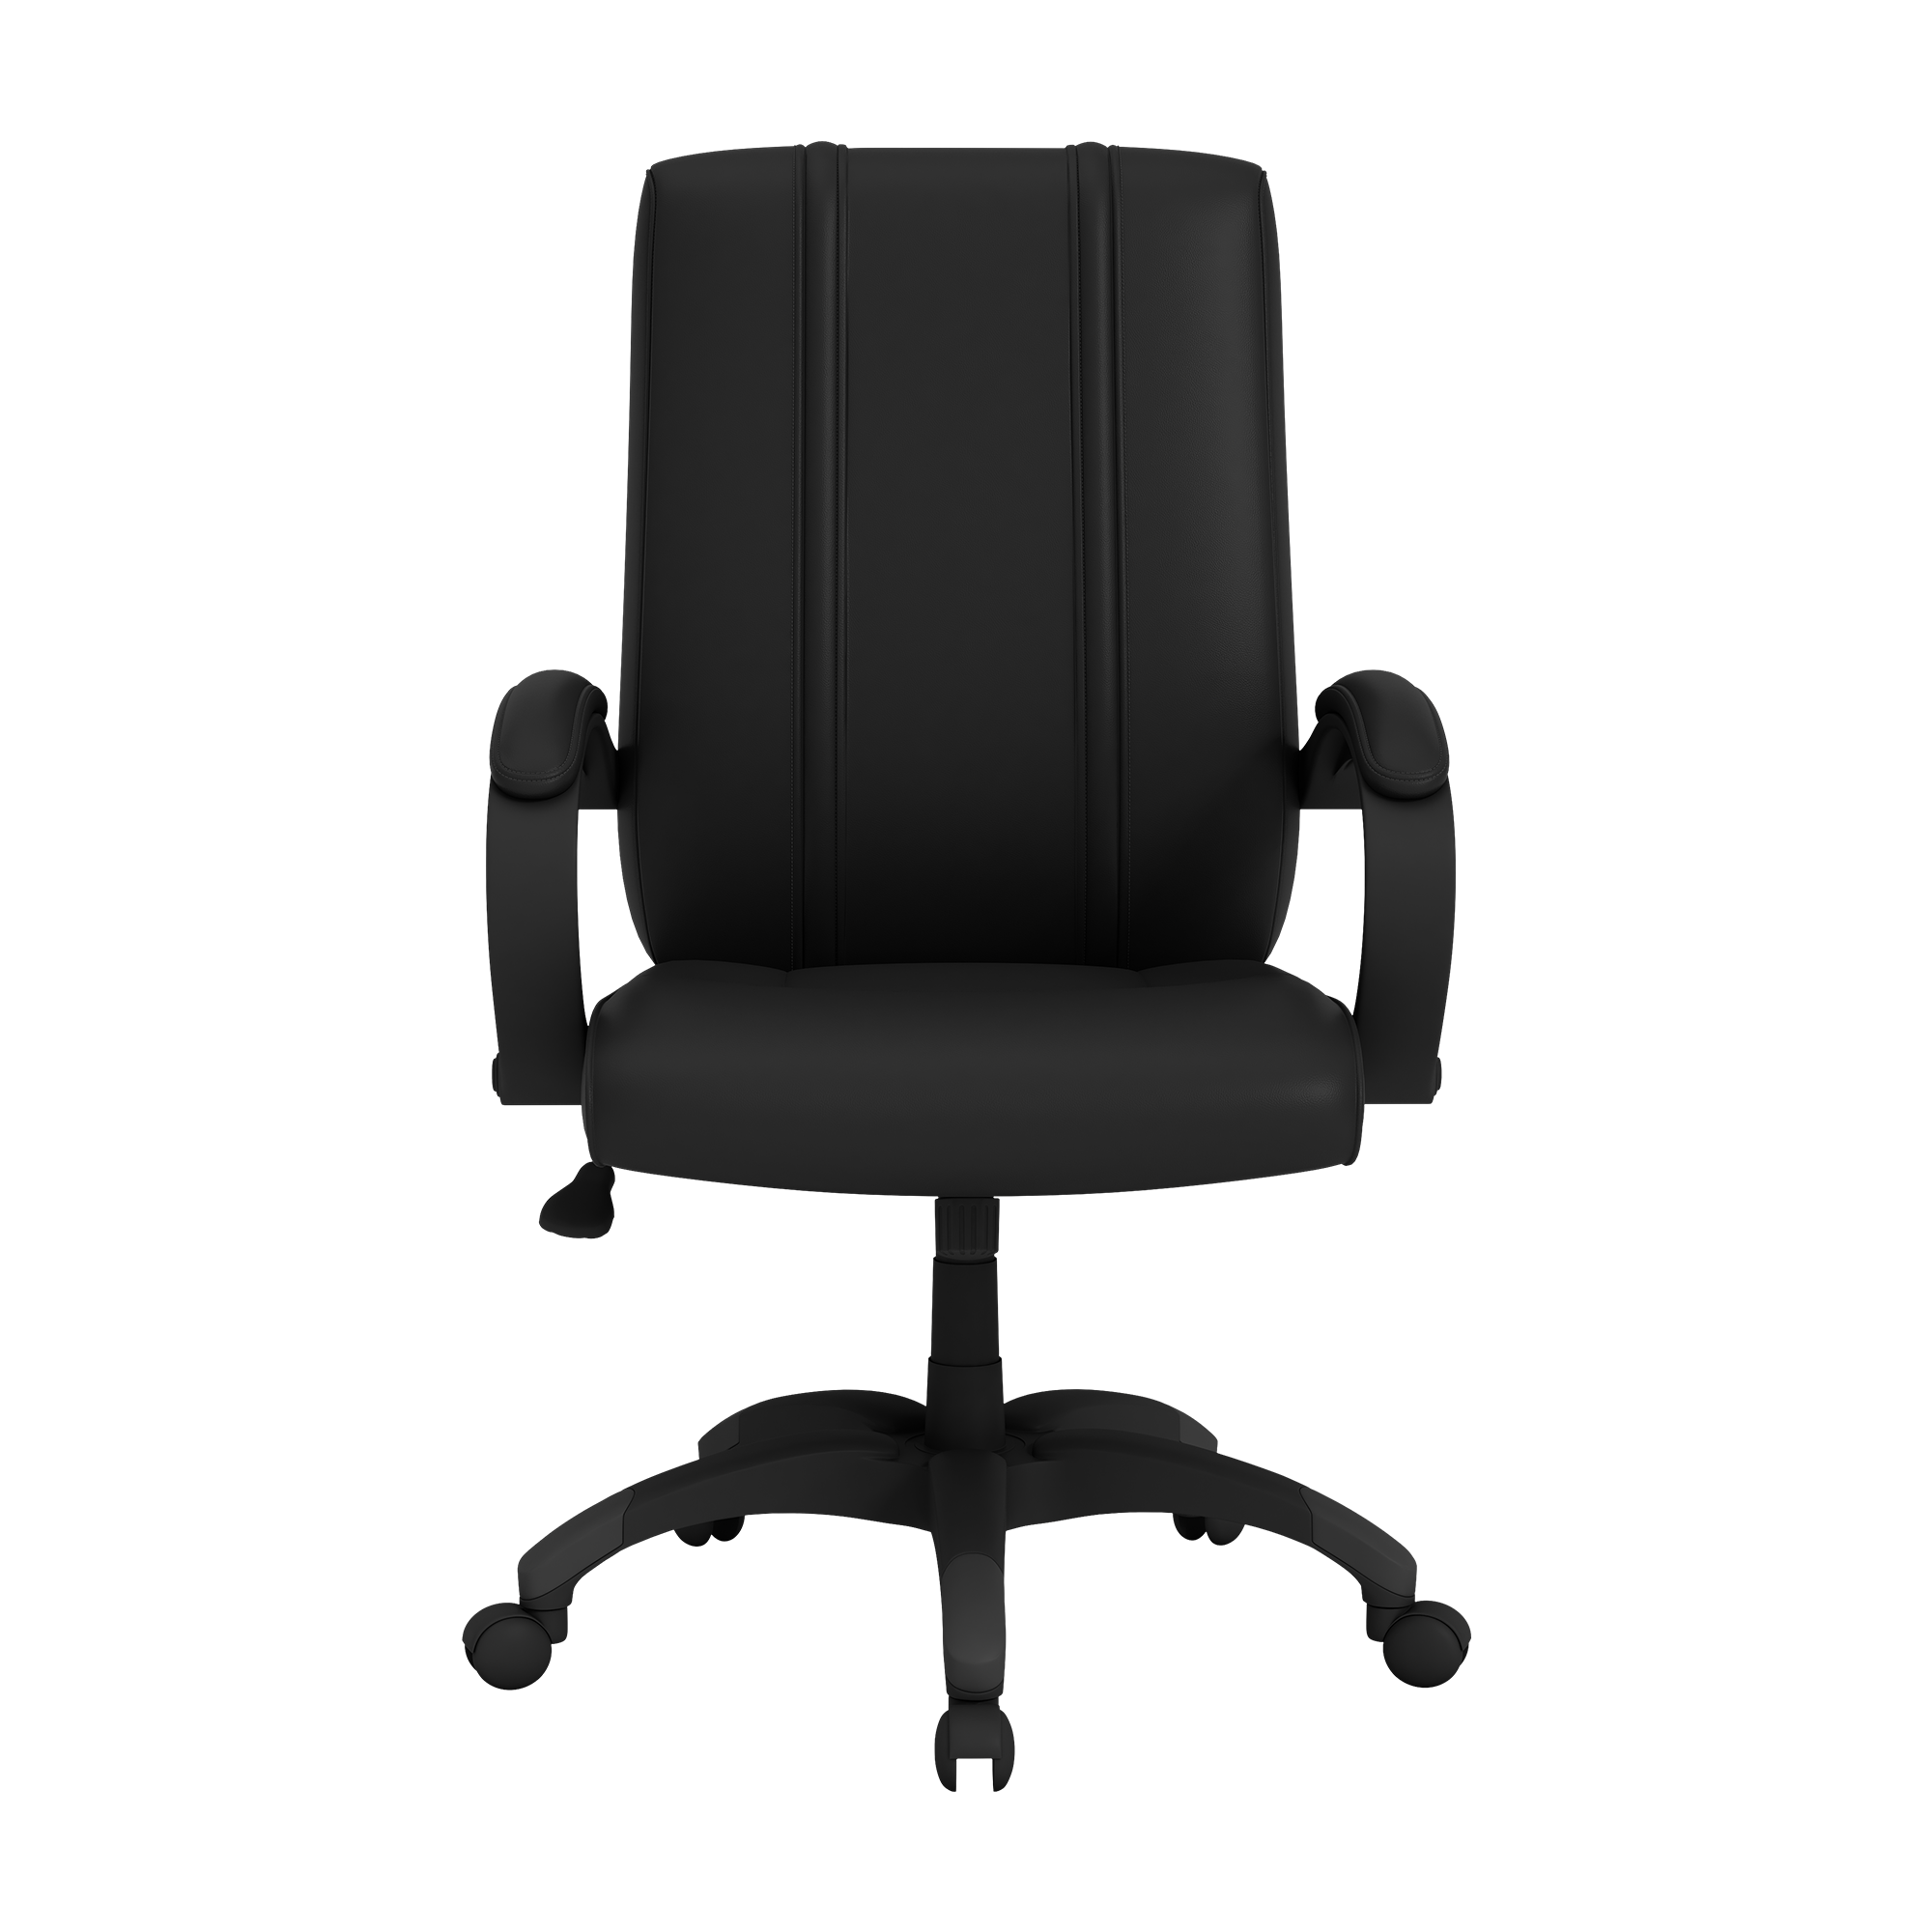 Office Chair 1000 with Chicago White Sox Cooperstown Secondary